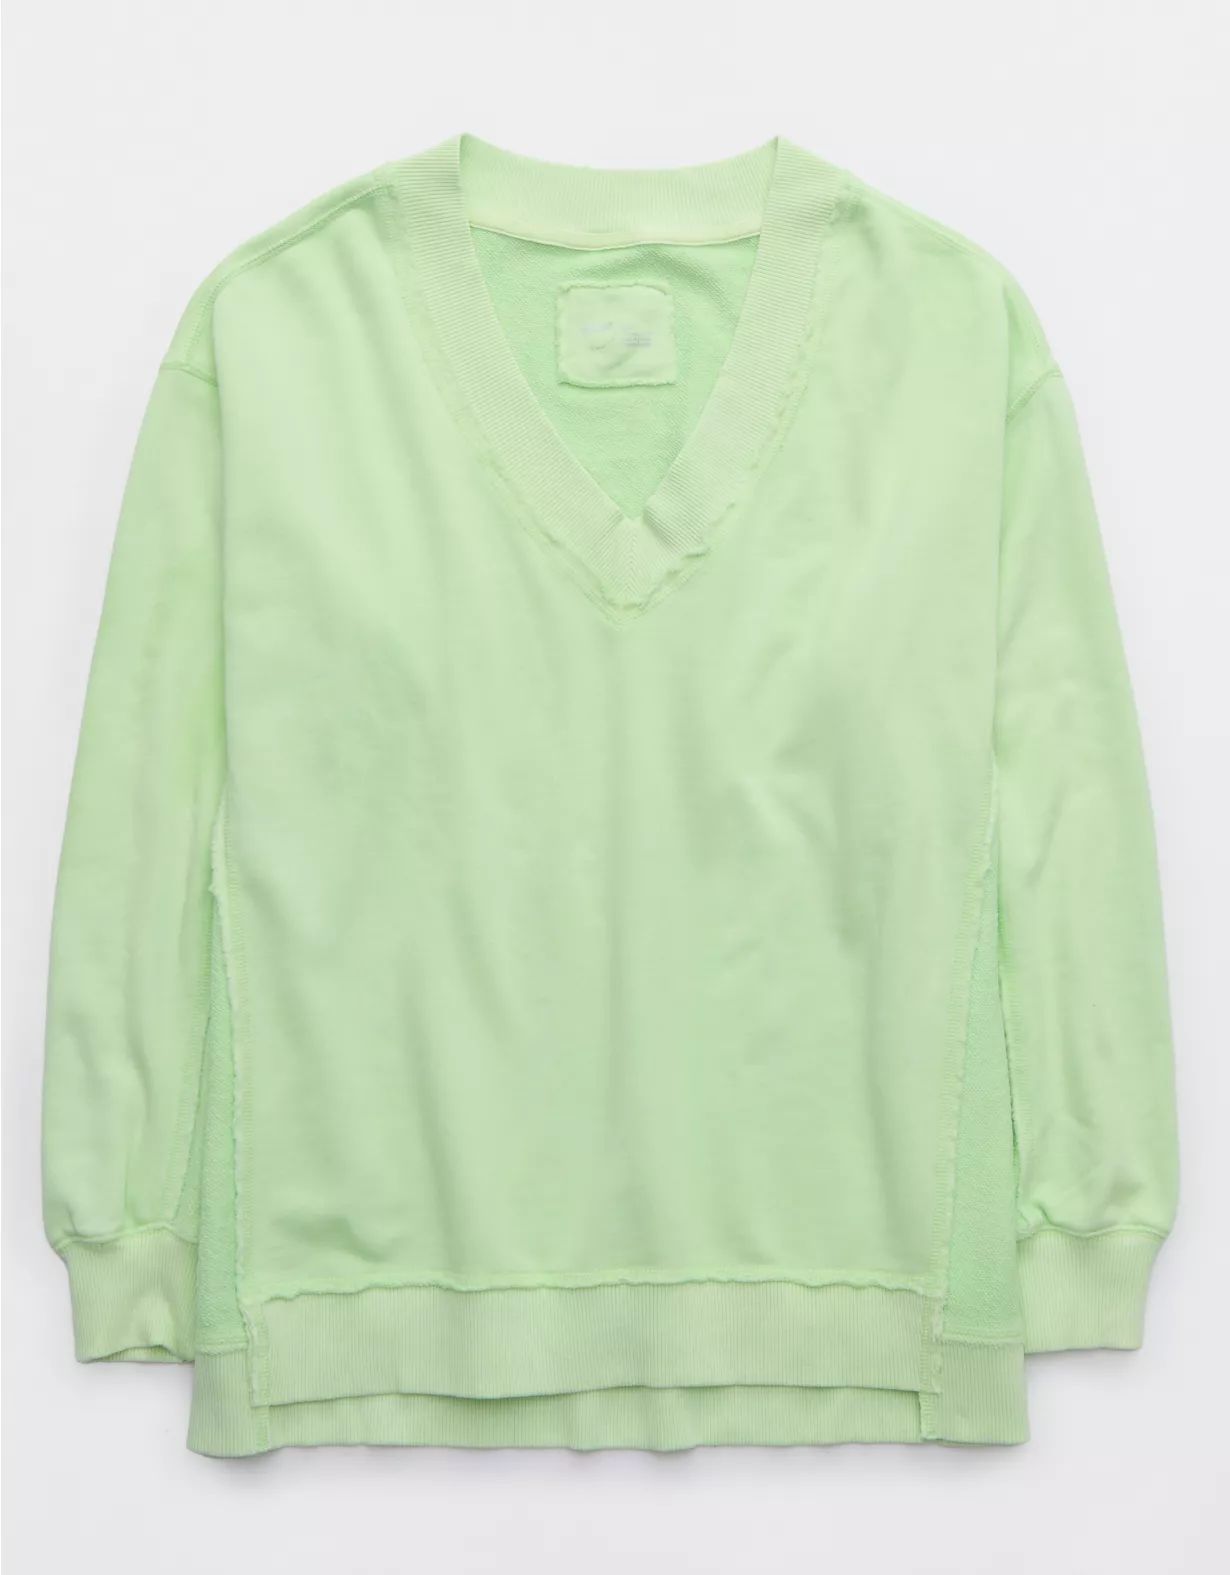 Aerie Vacay Every Day V Neck Sweatshirt | Aerie